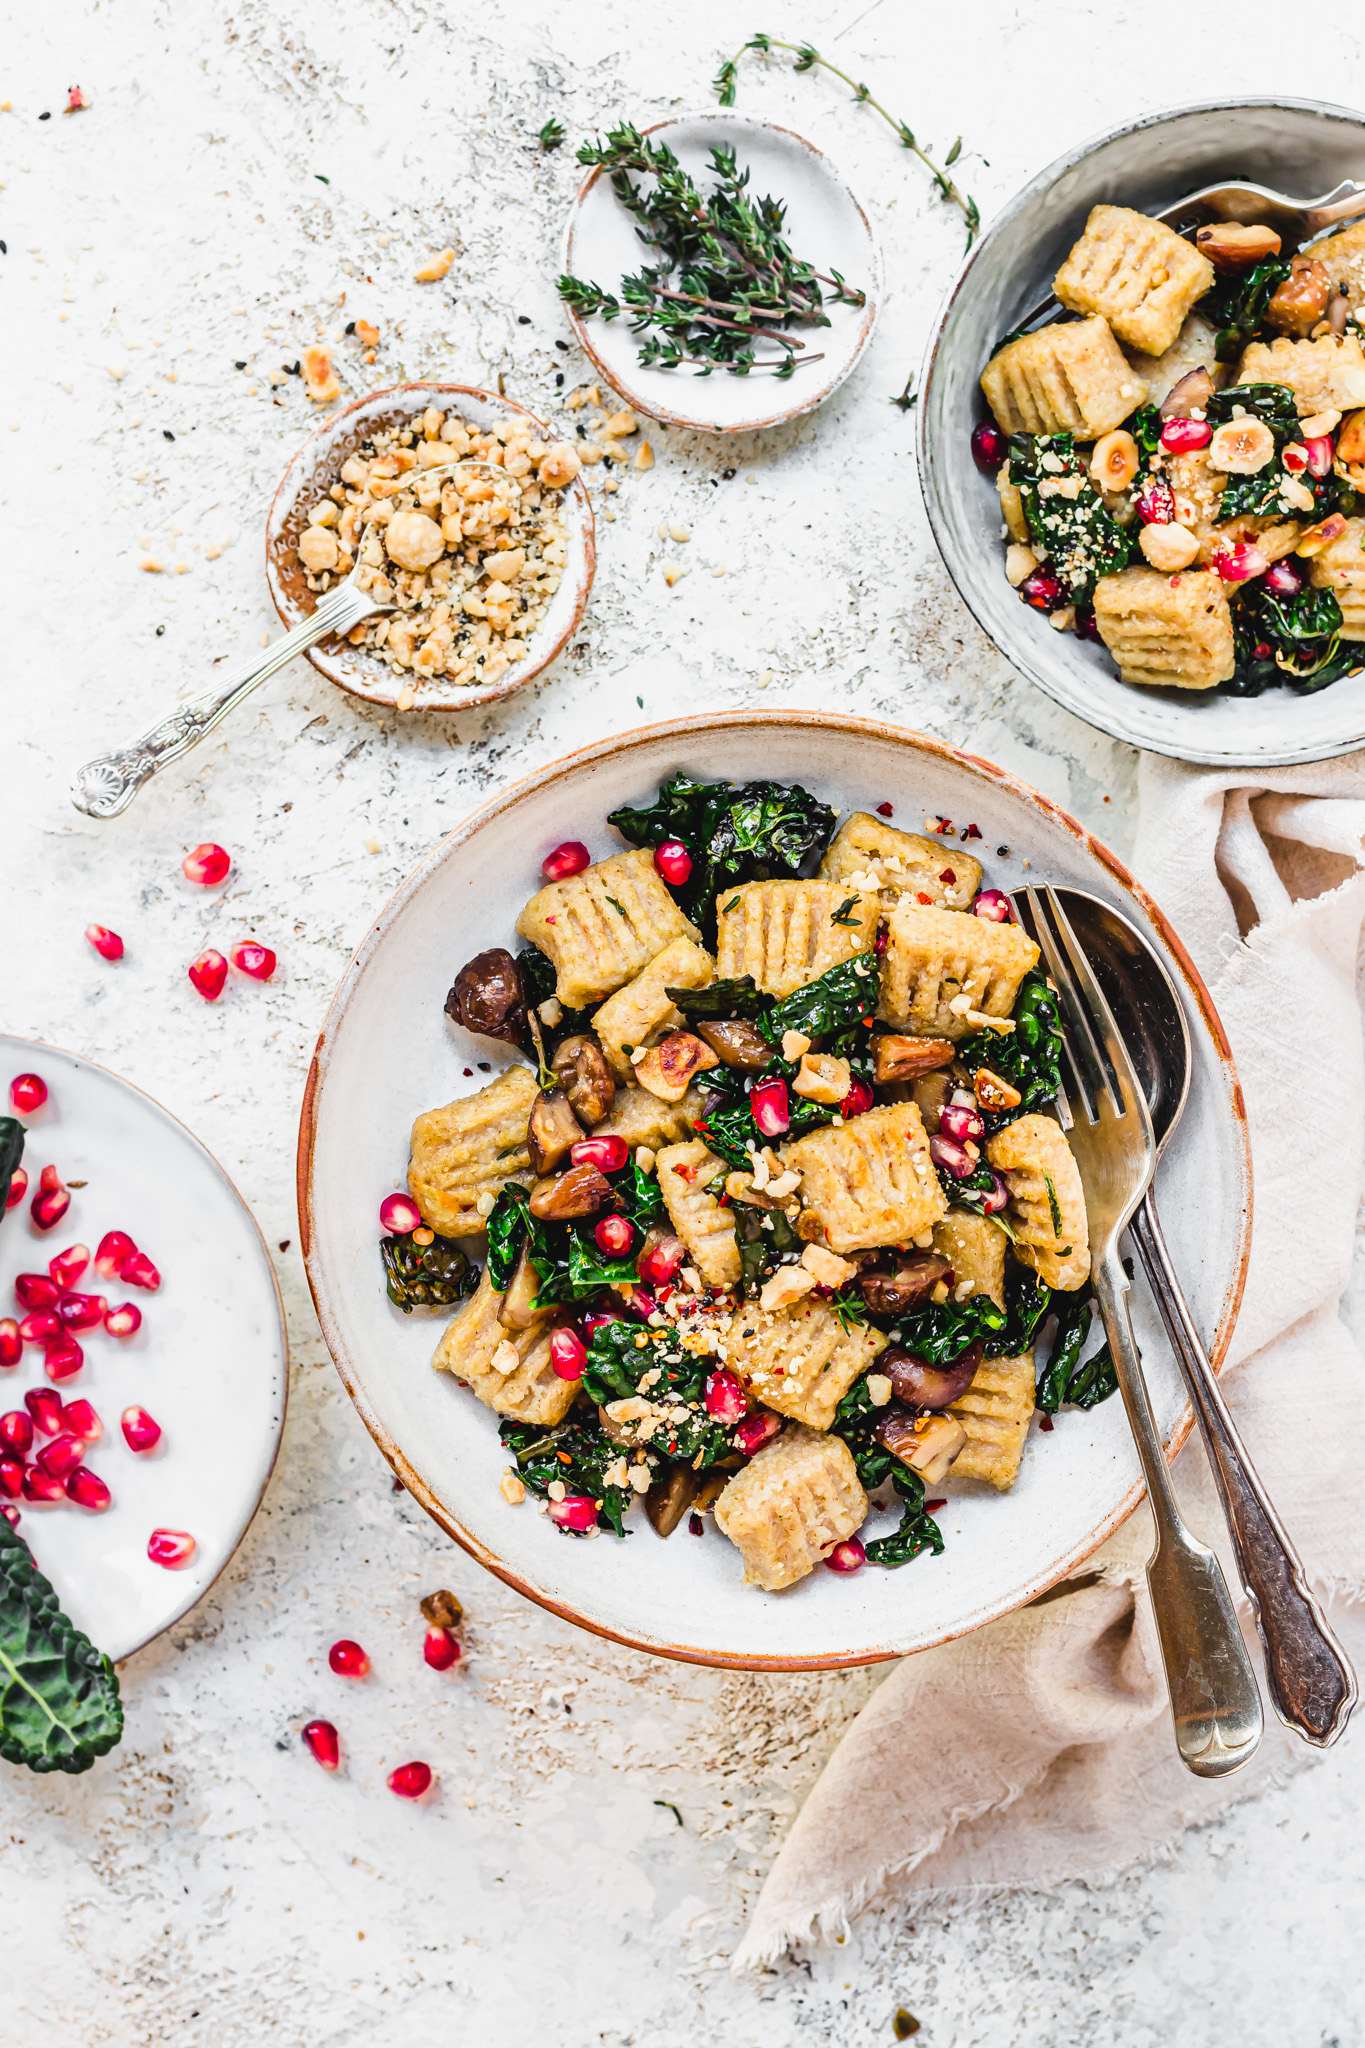 Parsnip Gnocchi with Chestnuts and Kale